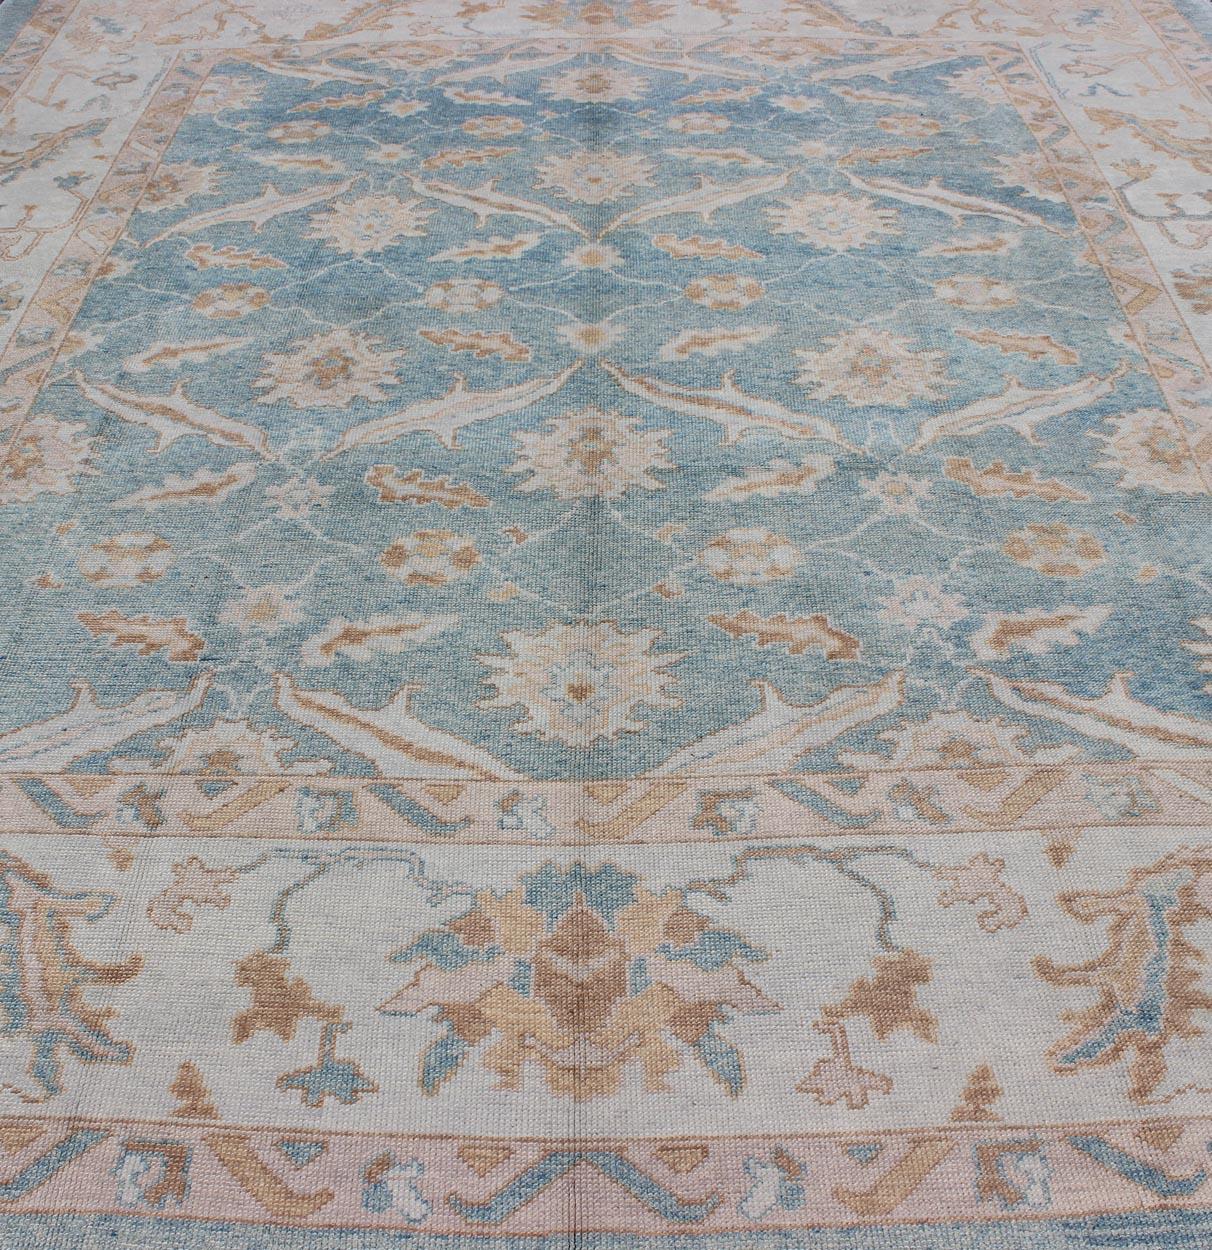 Square Turkish Oushak Rug in Light Blue, Light Brown, Salmon, Silver & Tan In Excellent Condition For Sale In Atlanta, GA